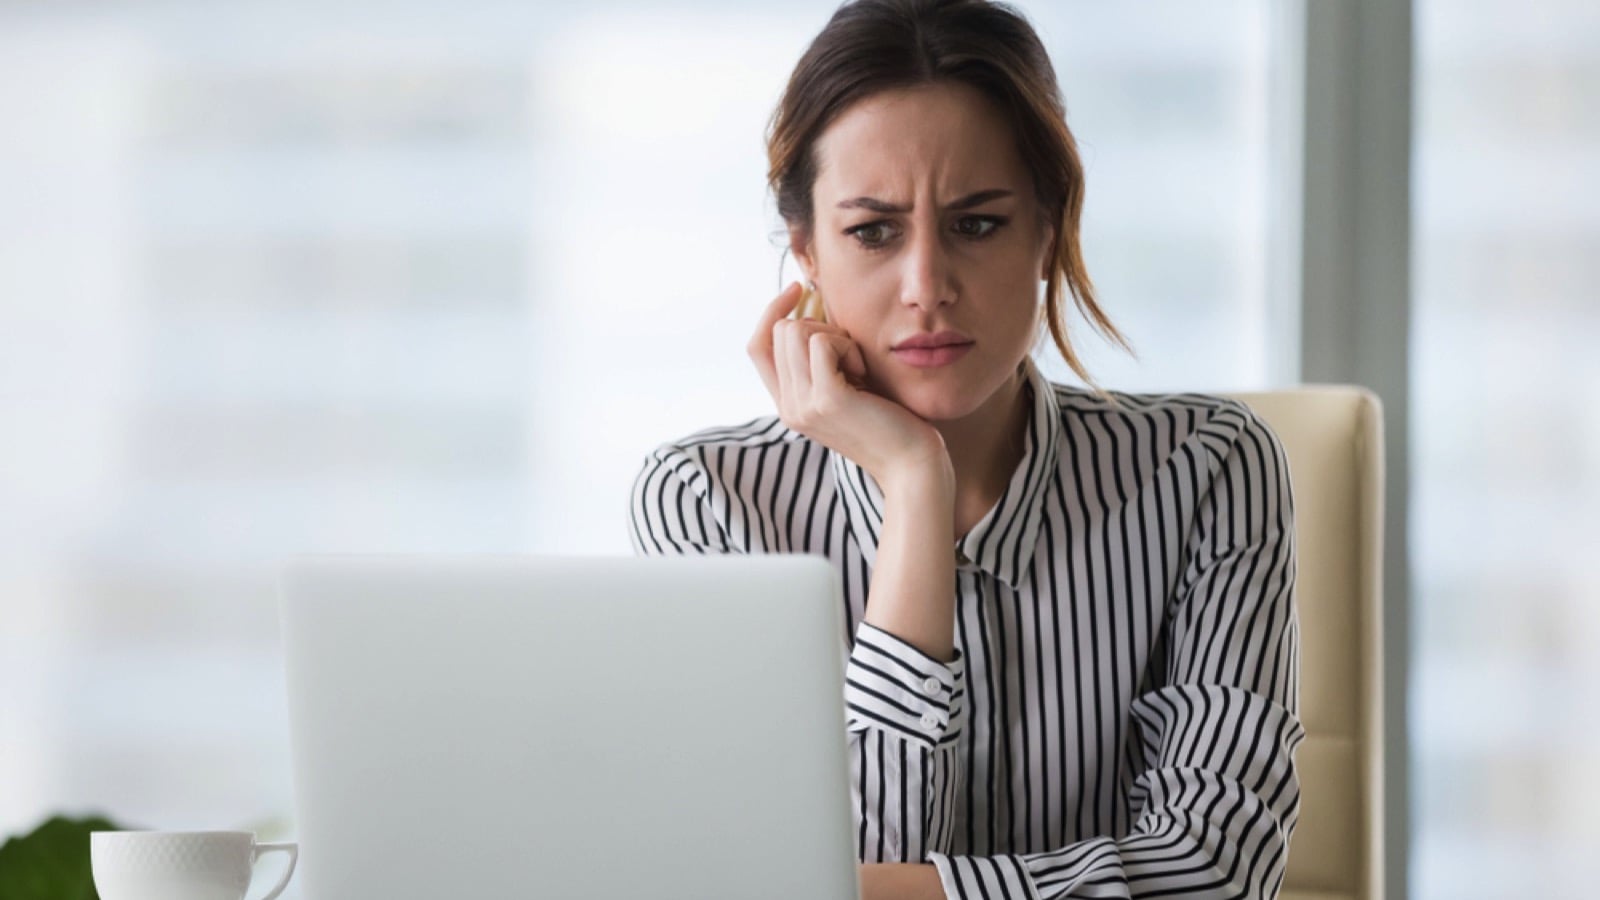 Woman in job shocked by job loss